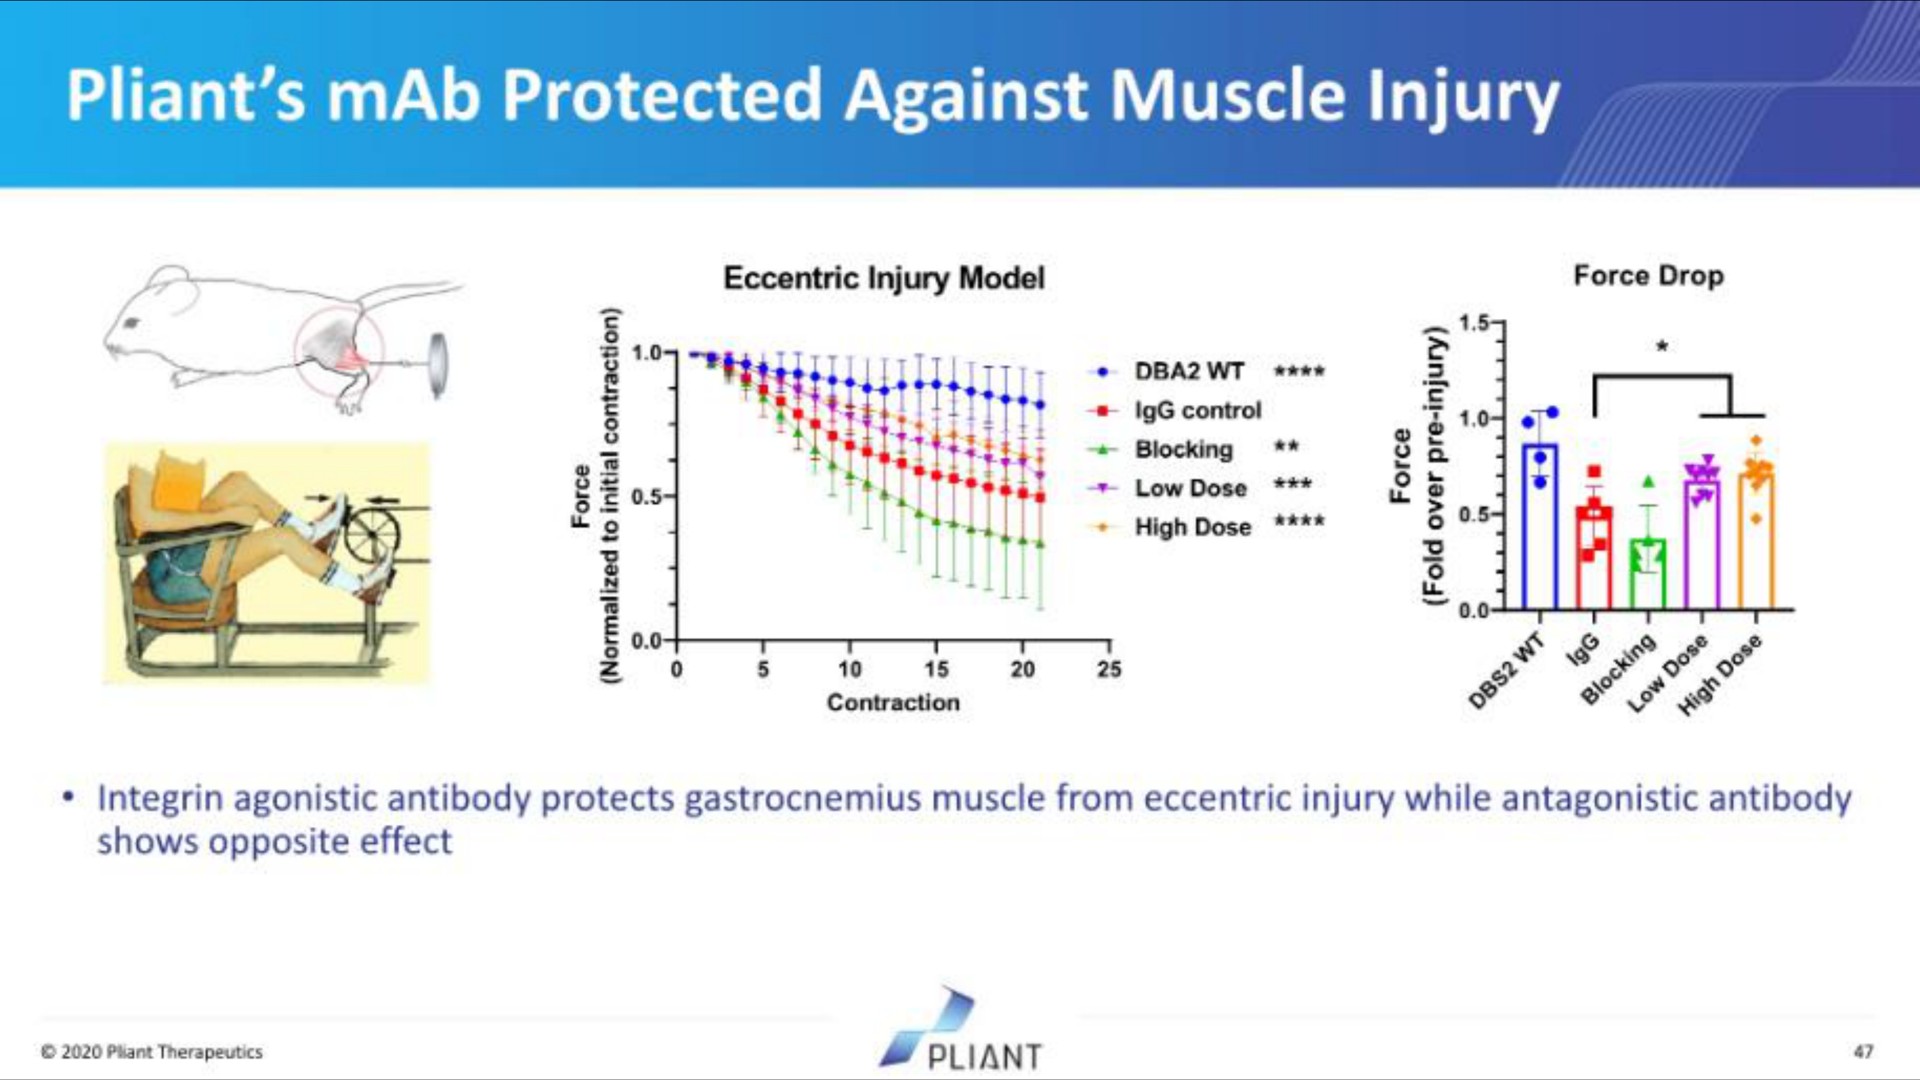 pliant protected against muscle injury | Pilant Therapeutics